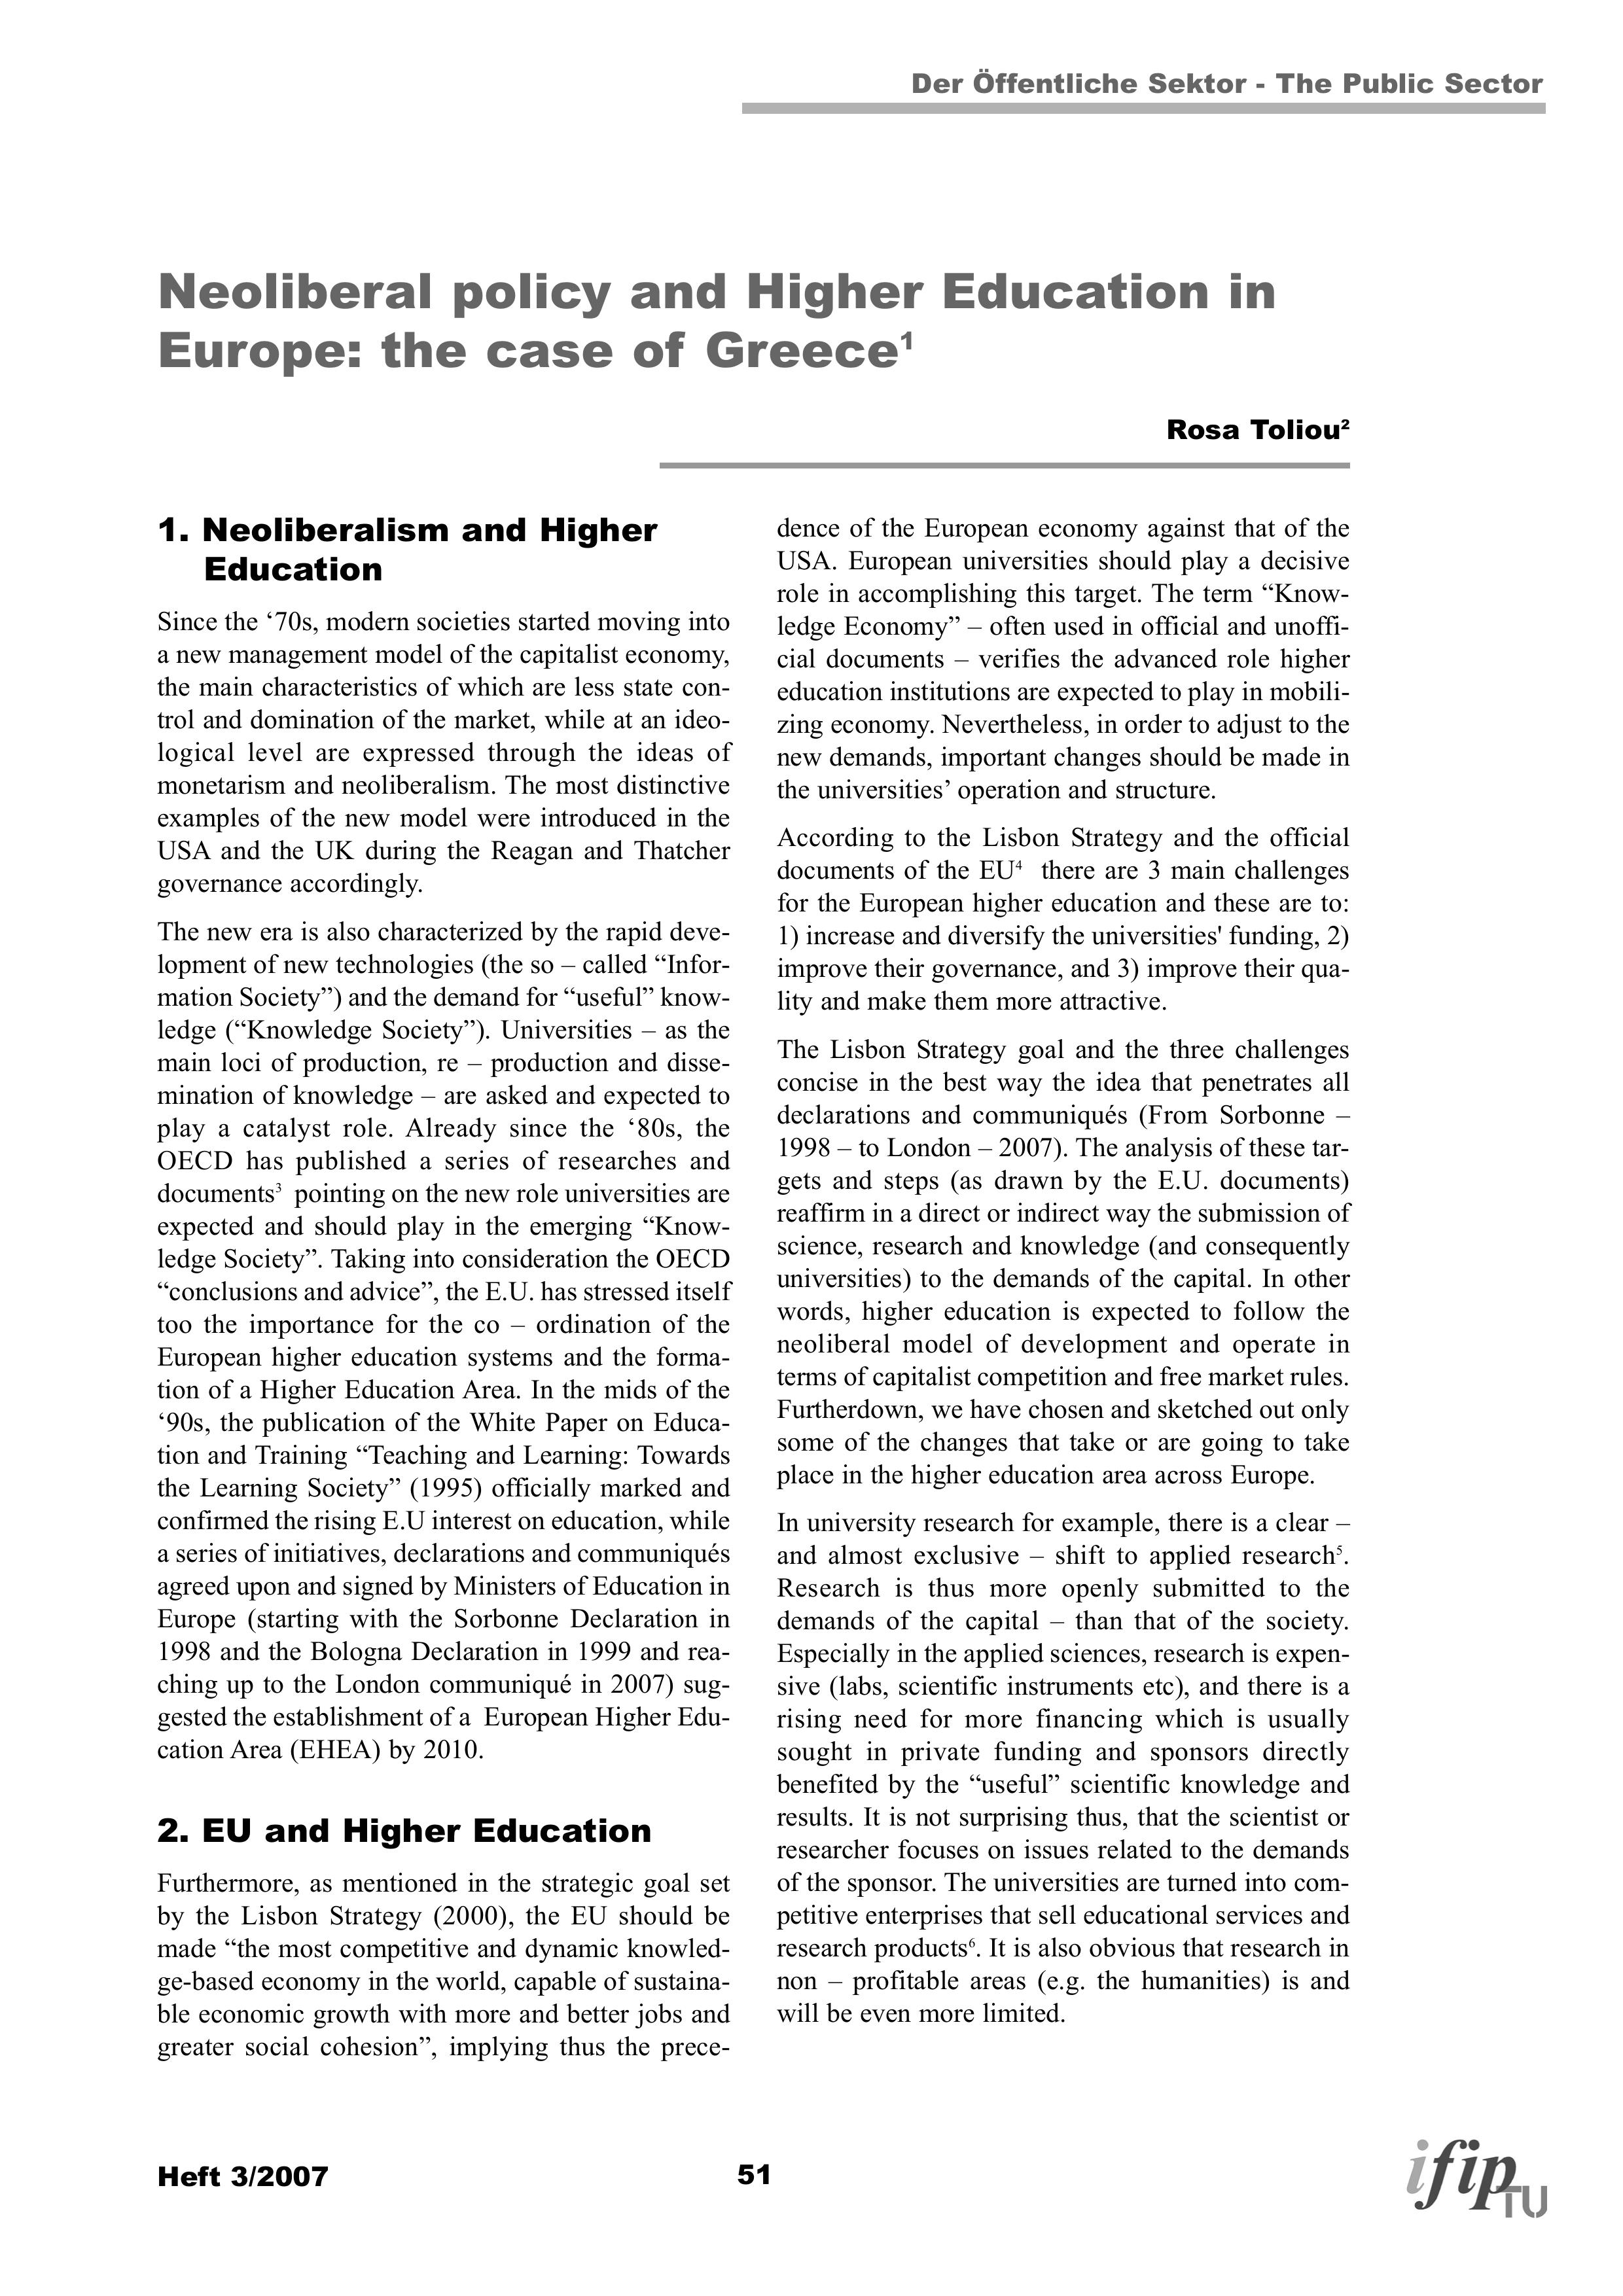 Neoliberal policy and Higher Education in Europe: the case of Greece